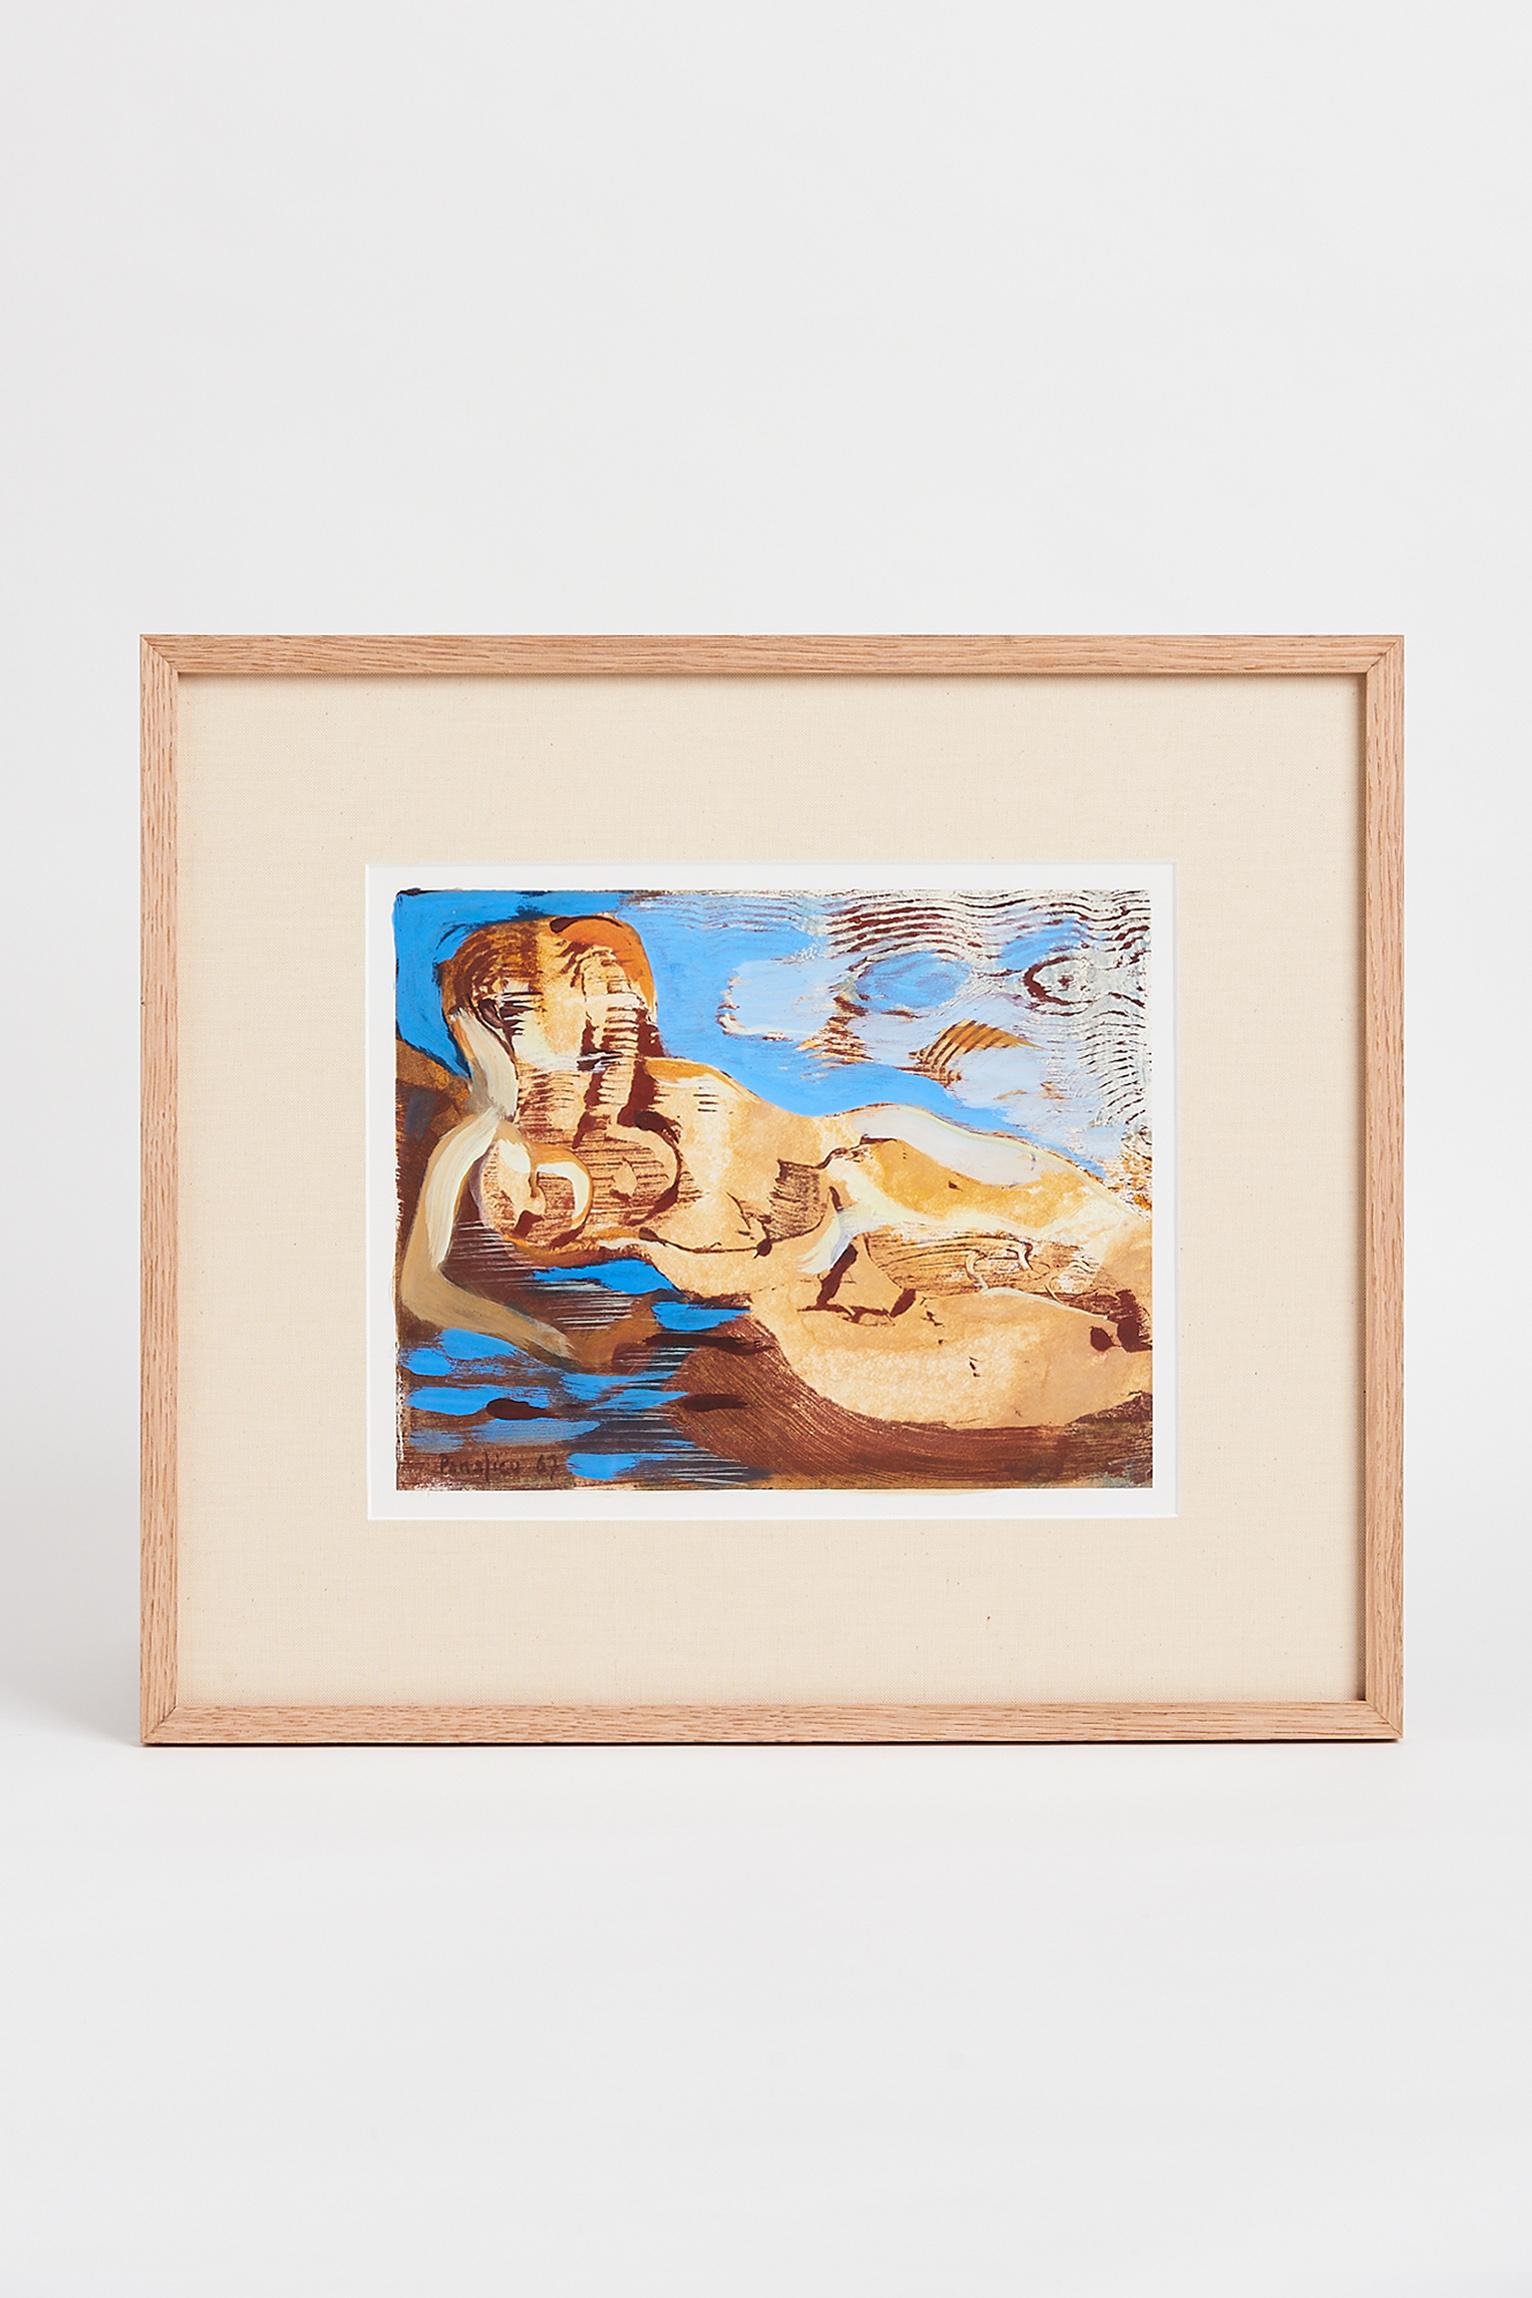 Jacques de Panafieu (1930-2001).
Reclining figure. 
Gouache on paper.
Signed and dated 1967.
Newly framed in a linen mount and oak frame.
 